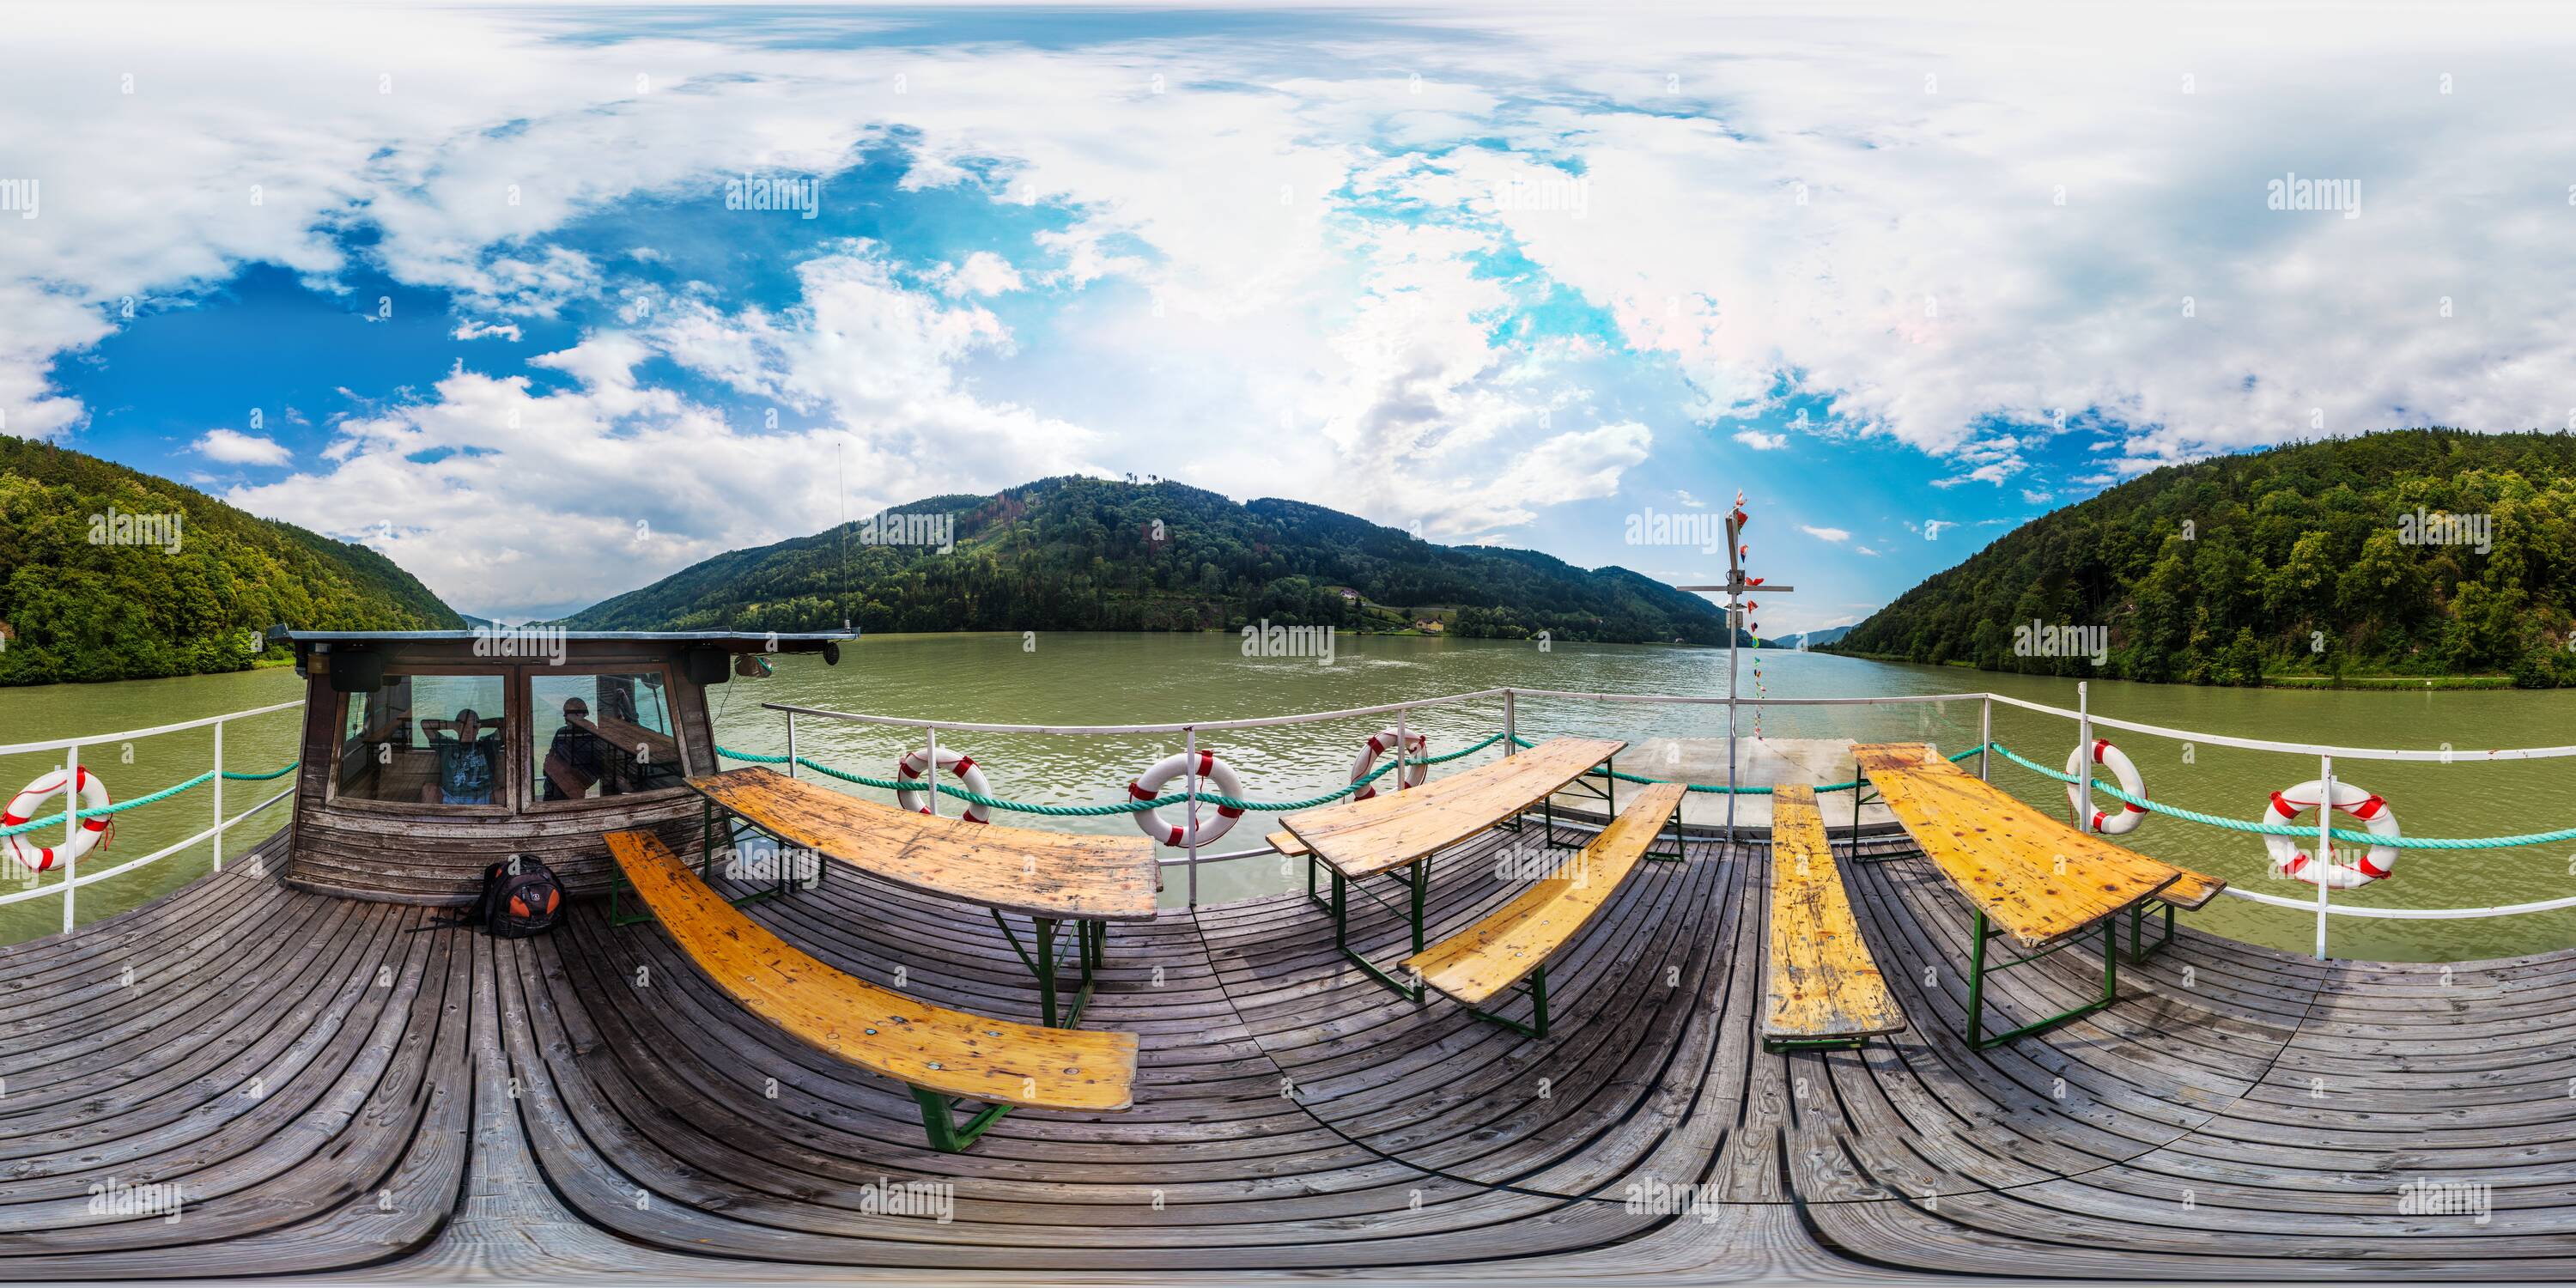 360 degree panoramic view of Boat on the river